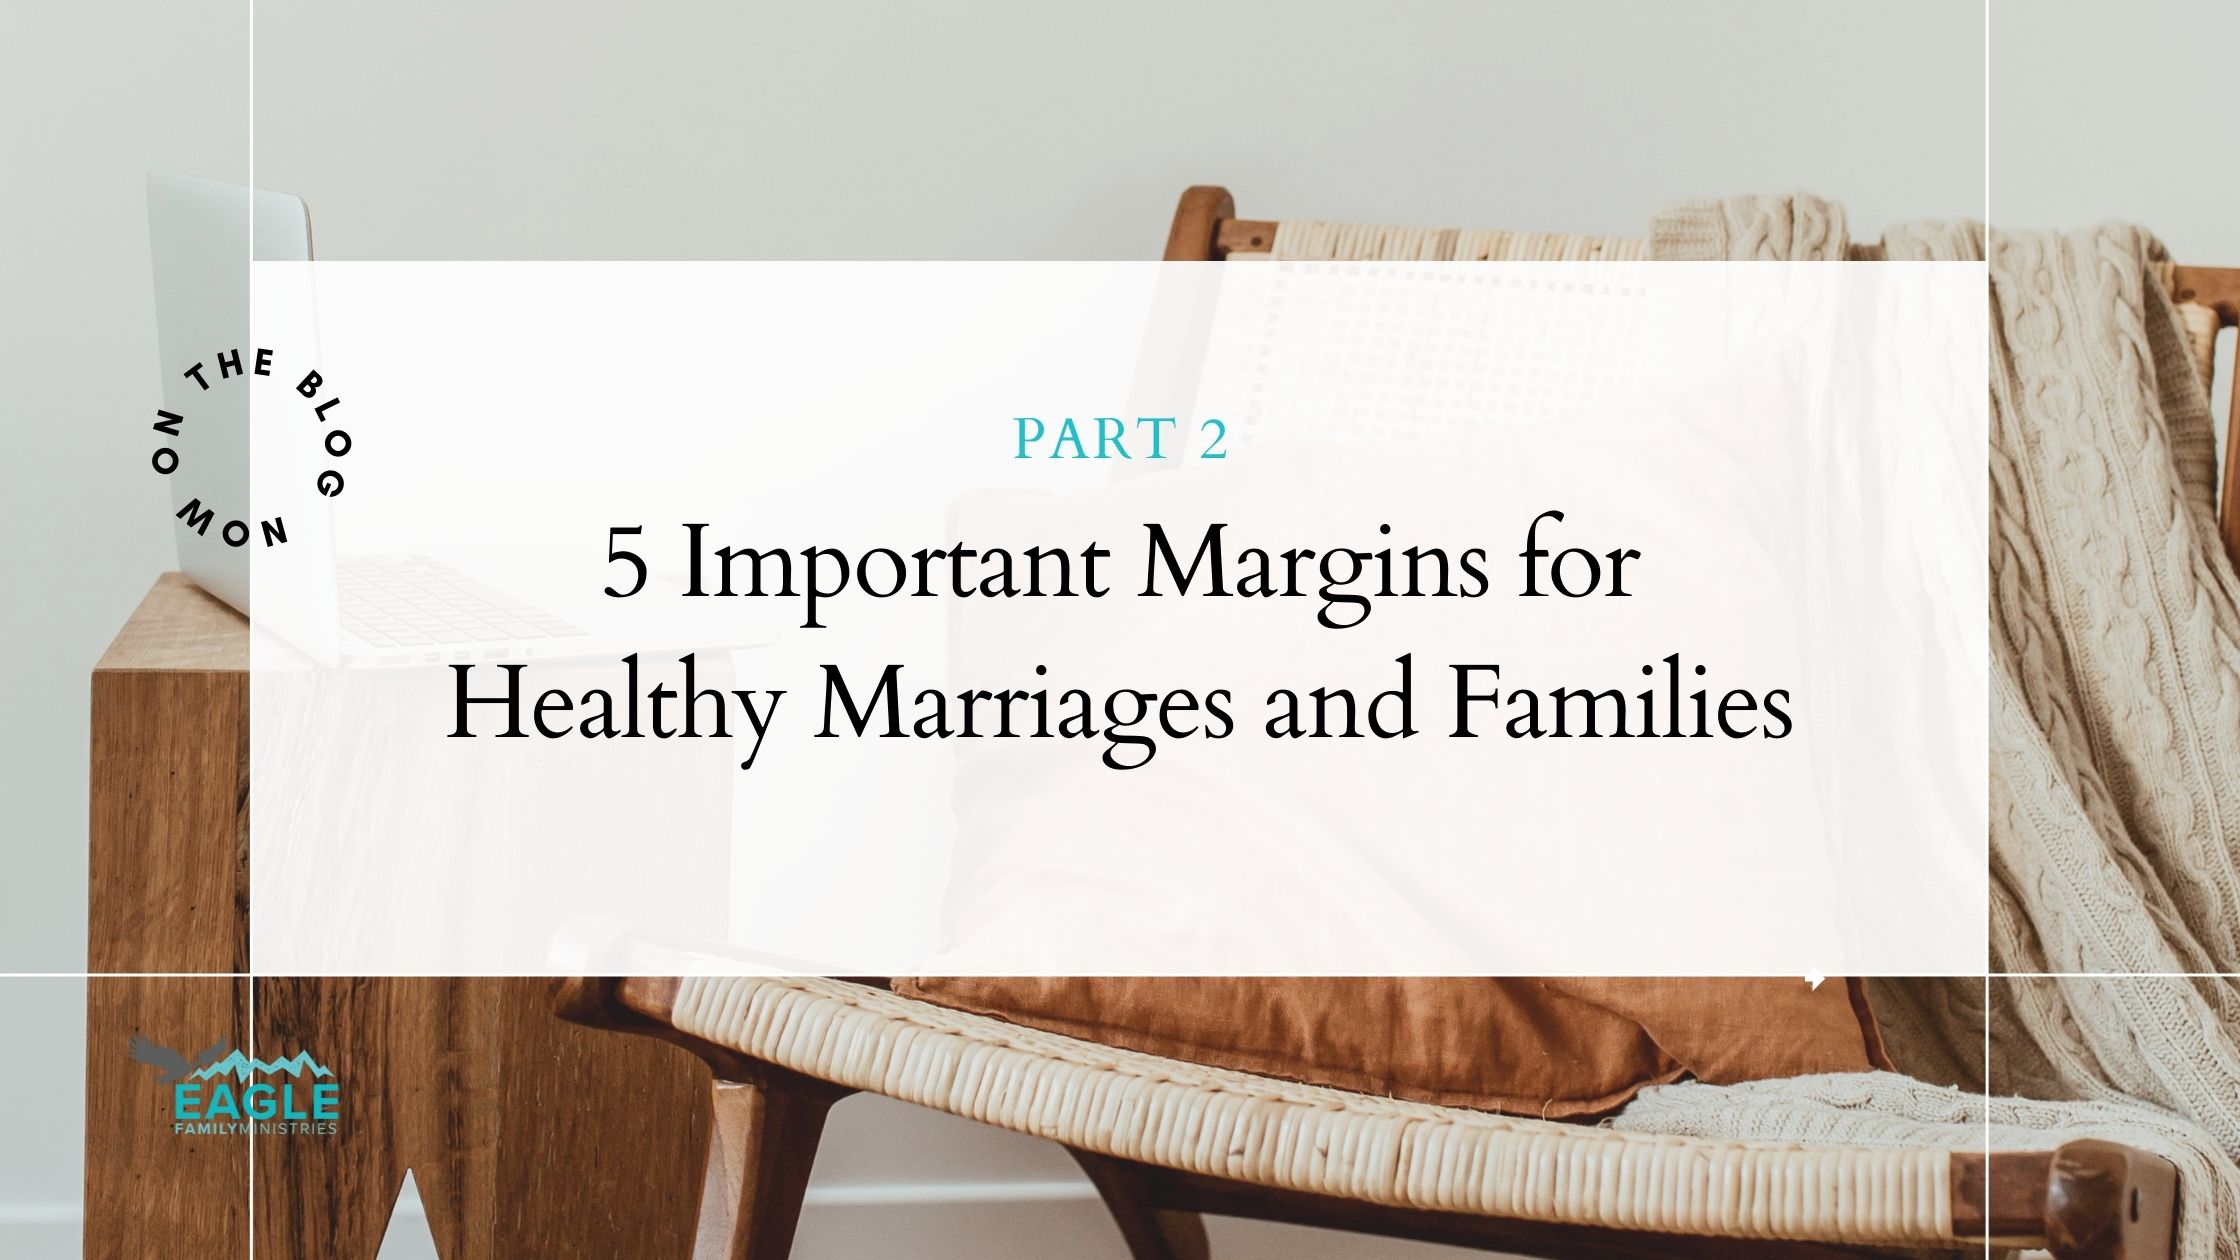 5 Important Margins for Healthy Marriages and Families